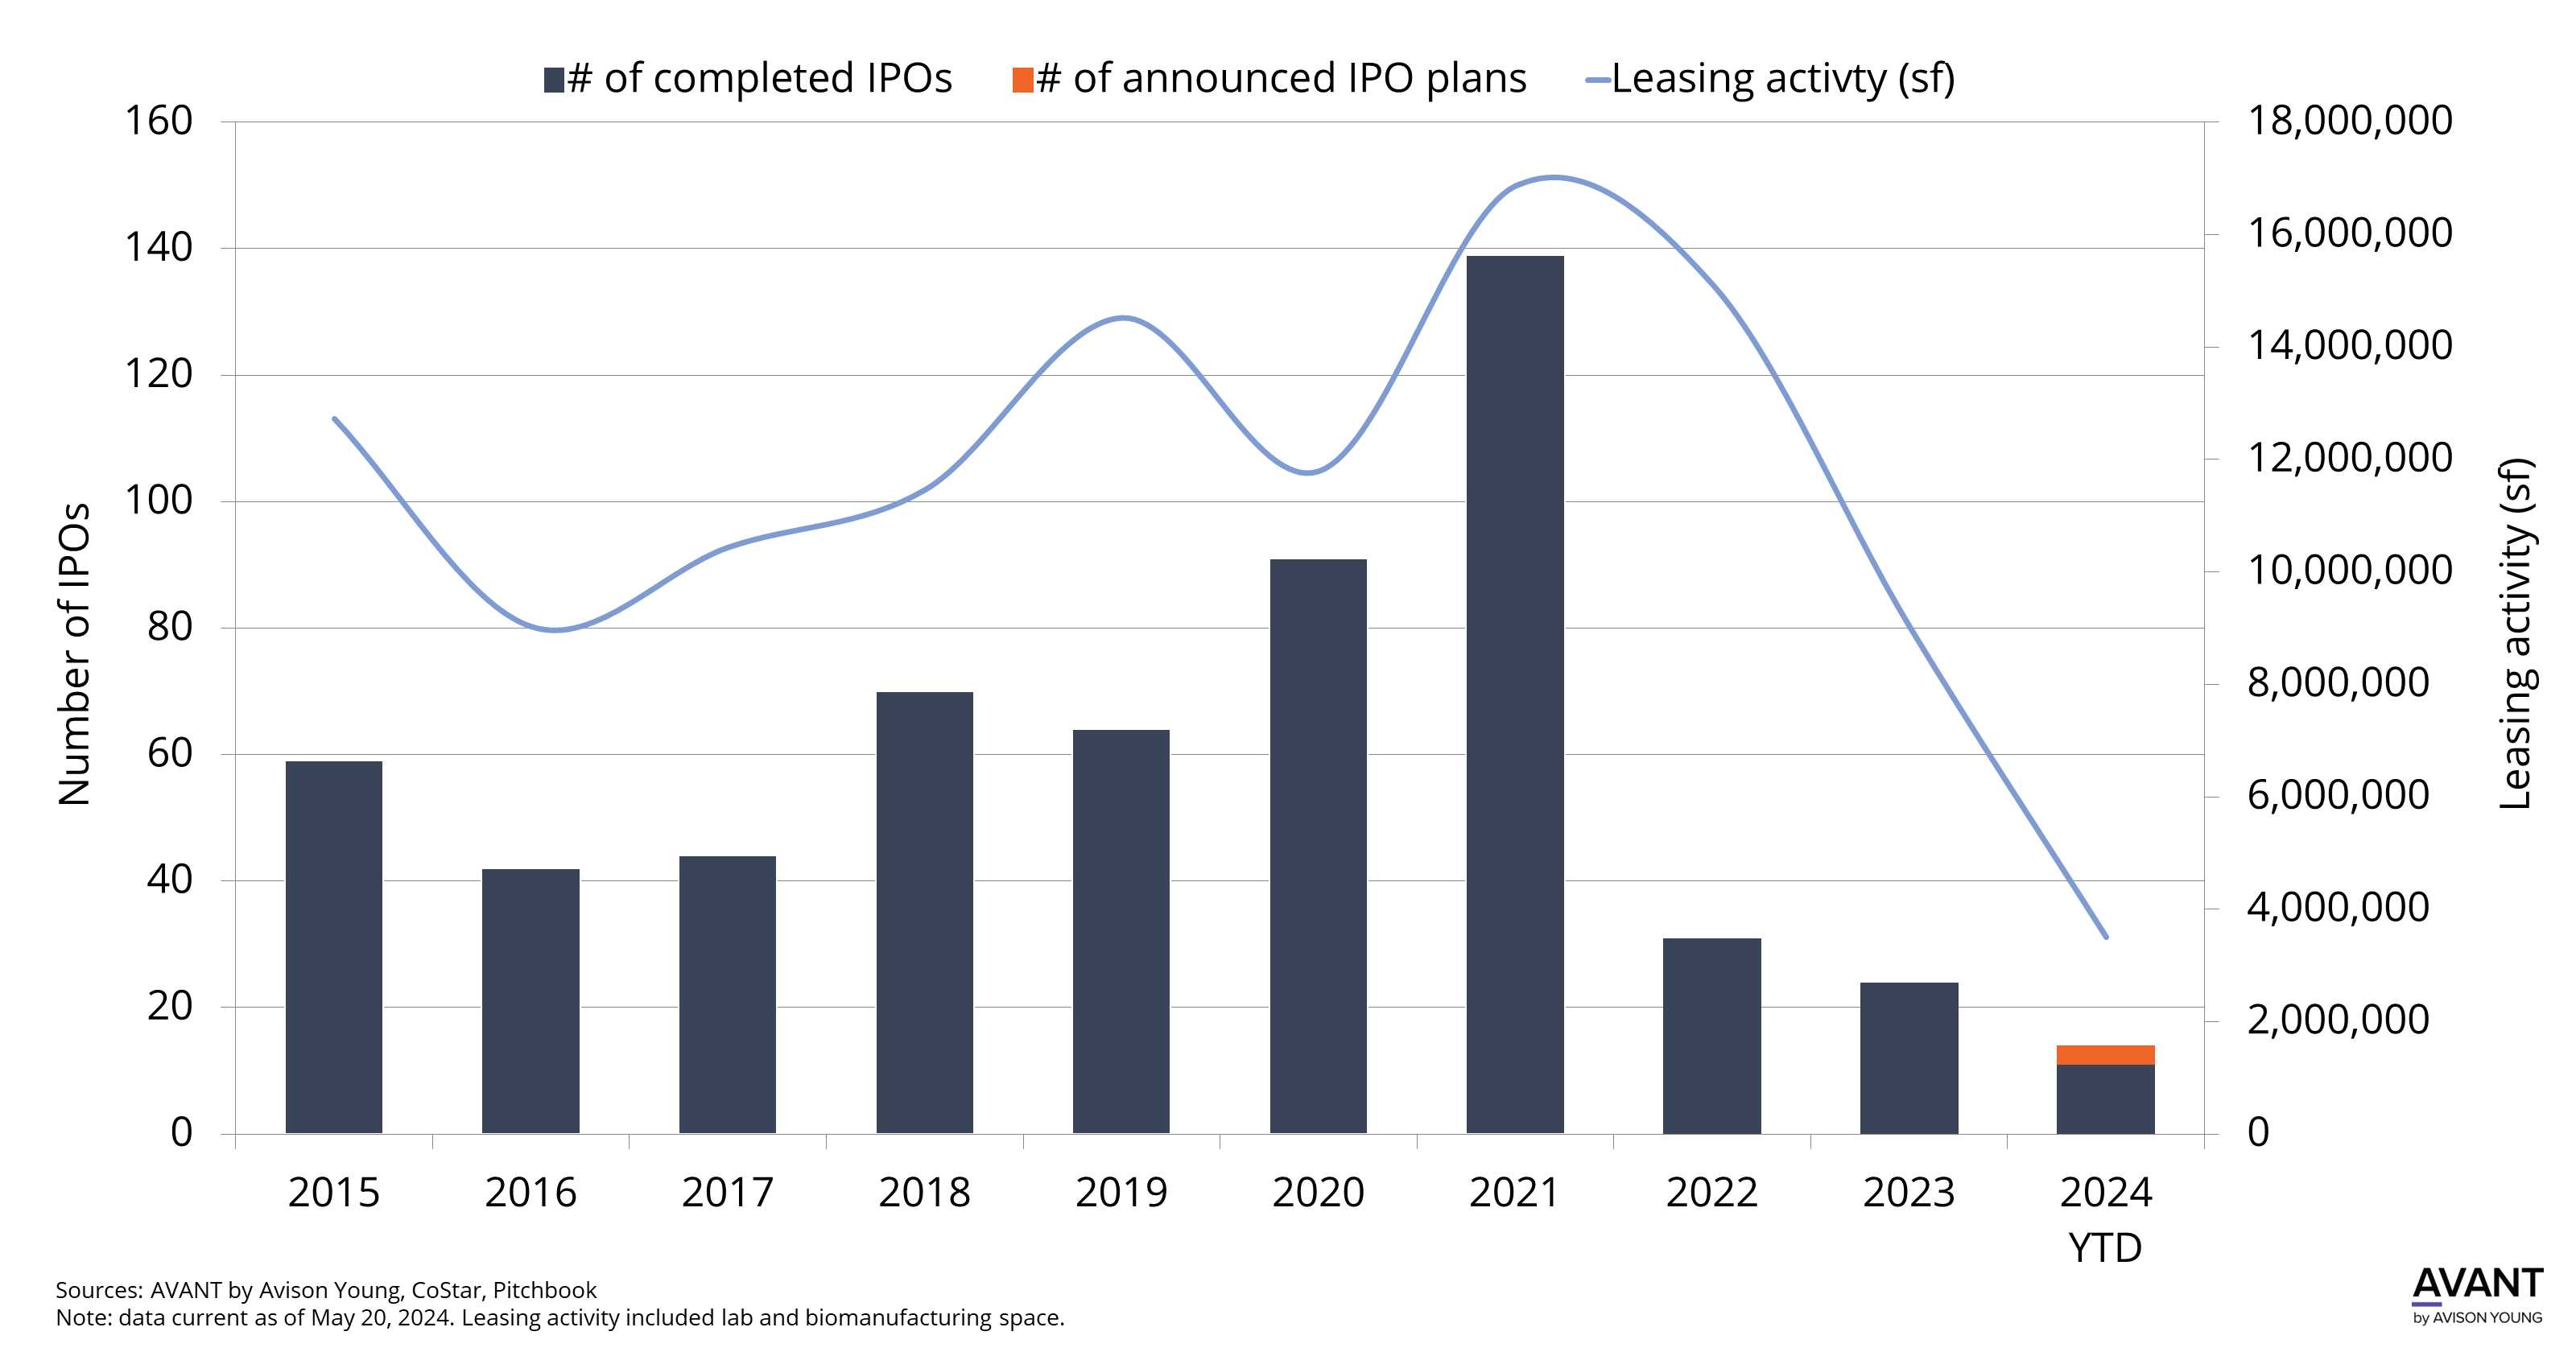 graph of number of completed and announced life science IPOs compared to leasing activity in the U.S. from 2015 to 2024